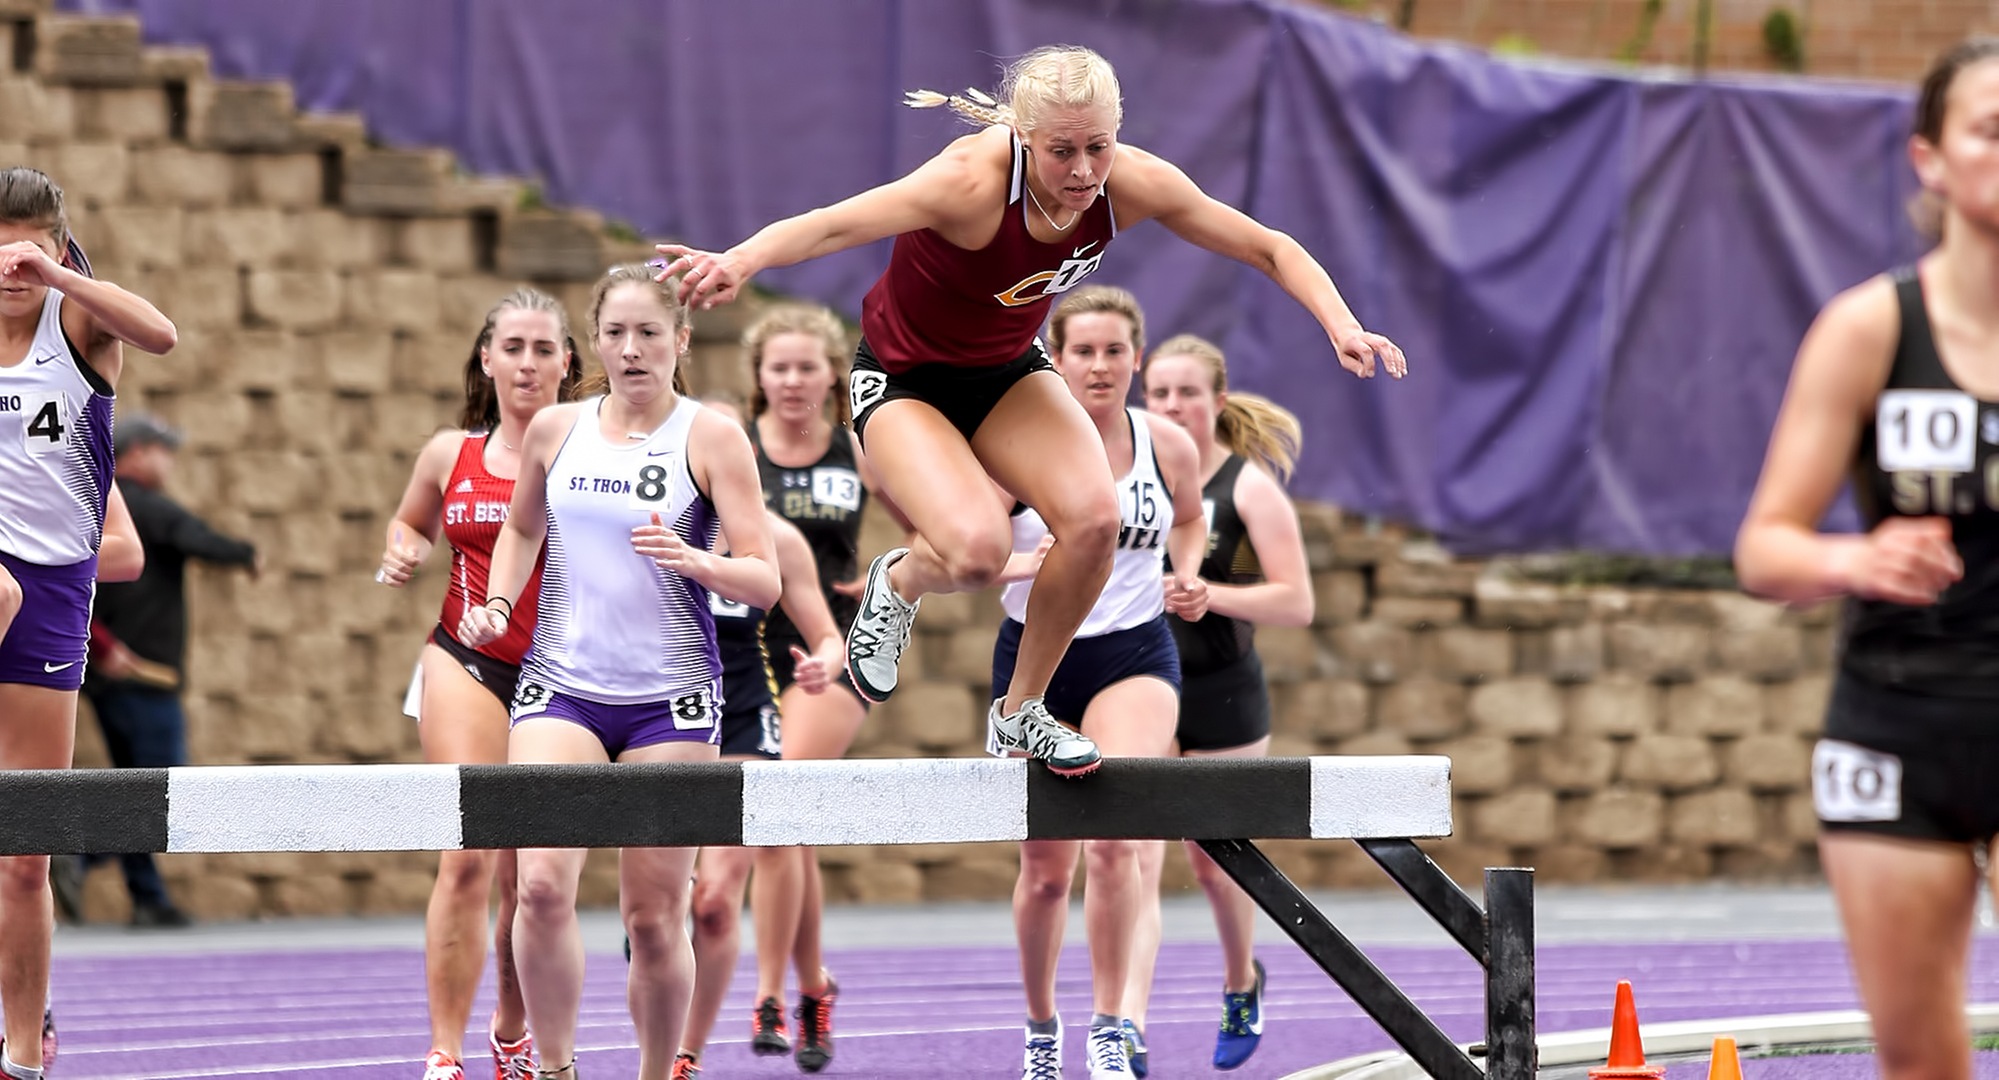 Junior Miriah Forness clears the steeplechase hurdle at the MIAC Meet. She went on to finish fifth in the event with the seventh fastest time in school history. (Photo courtesy of Nathan Lodermeier)